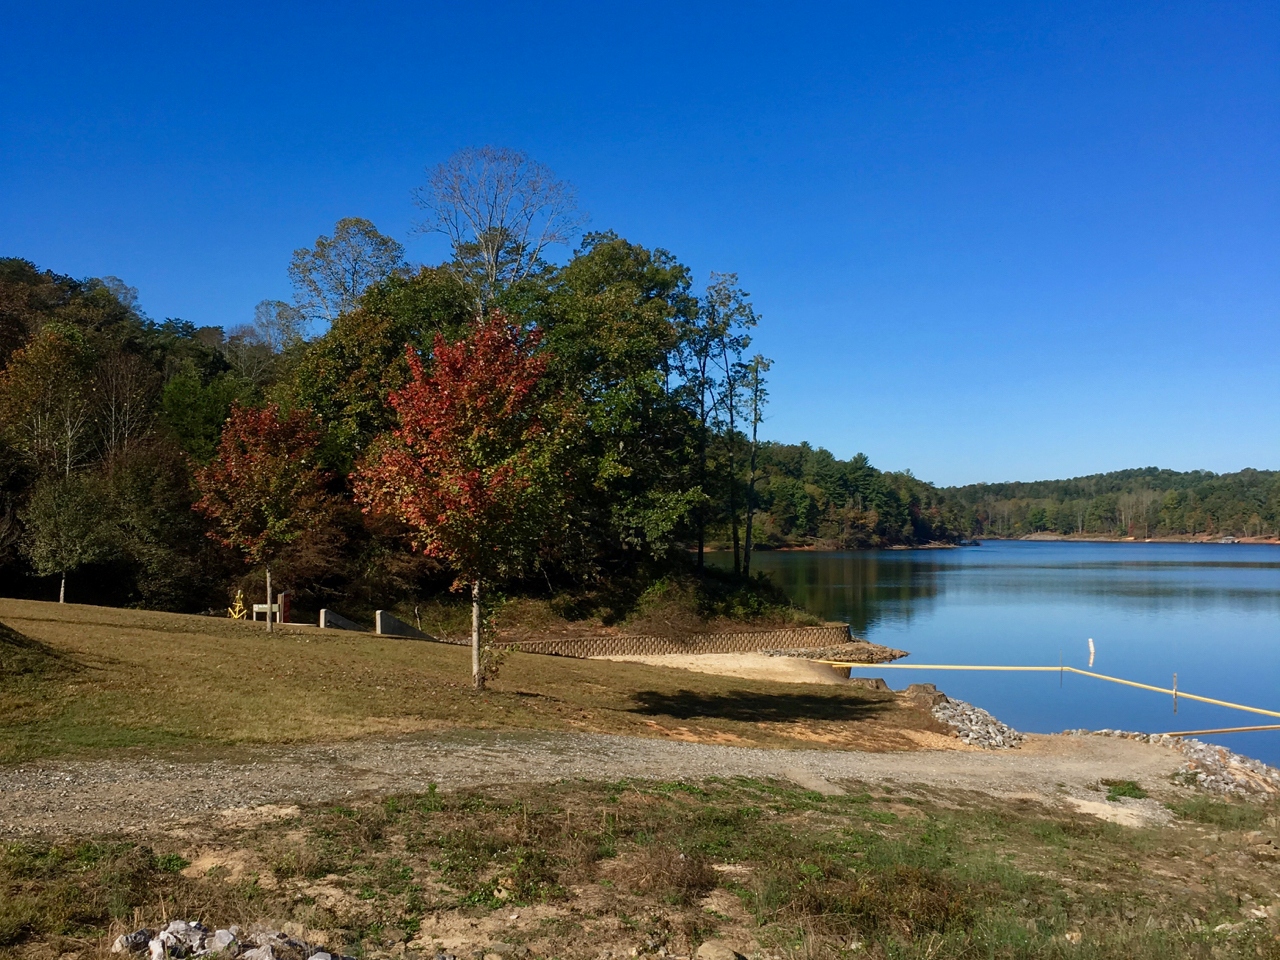 autumn trees and water at Bandits Roost campground in North Carolina